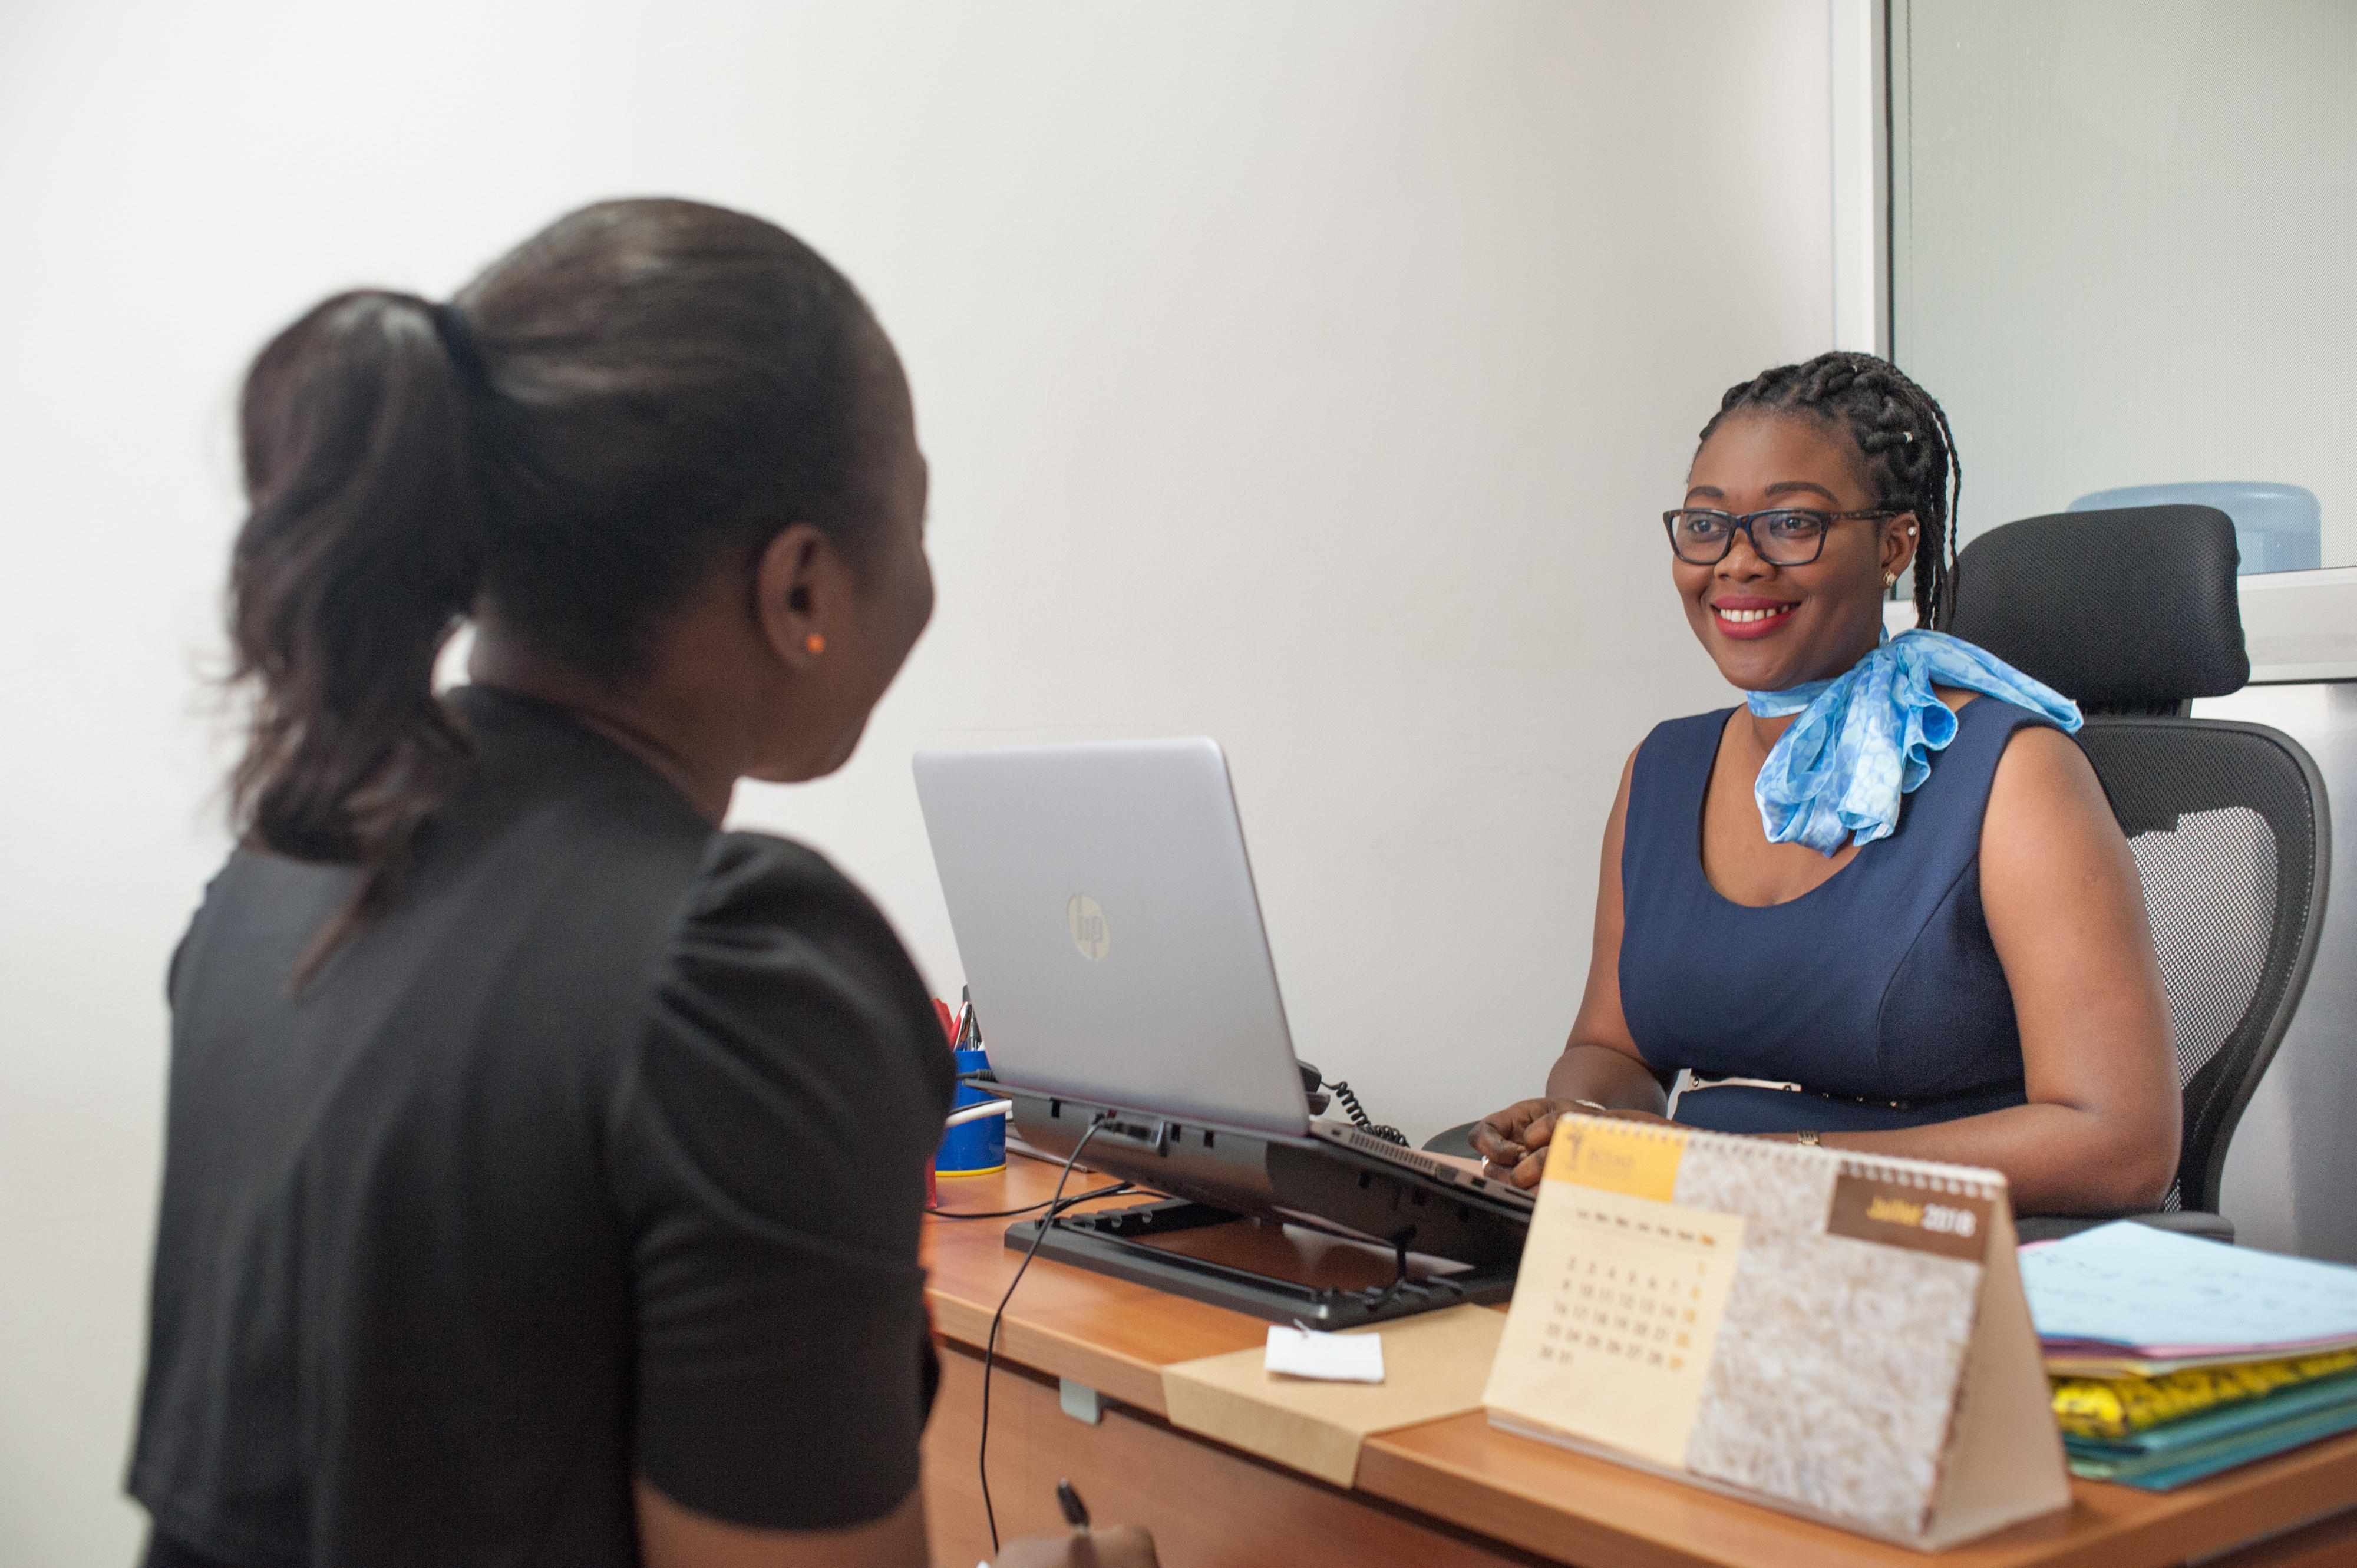 Counselling interview at the Centre for Jobs, Migration and Reintegration in Dakar, Senegal